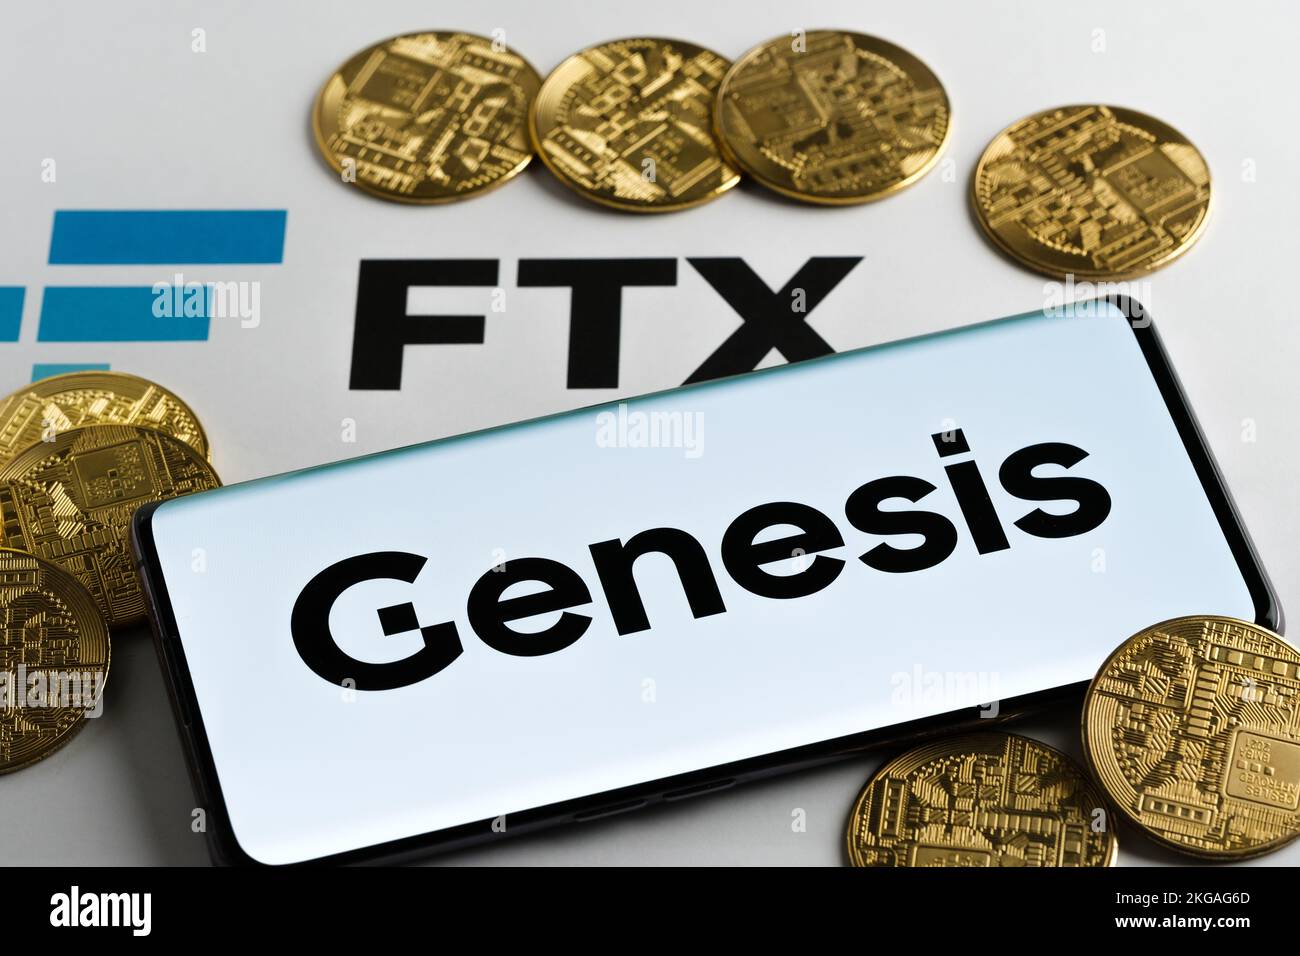 FTX and Genesis concept. Genesis Trading crypto company logo seen on screen of the smartphone surrounded by tokens and FTX logo printed on paper. Staf Stock Photo